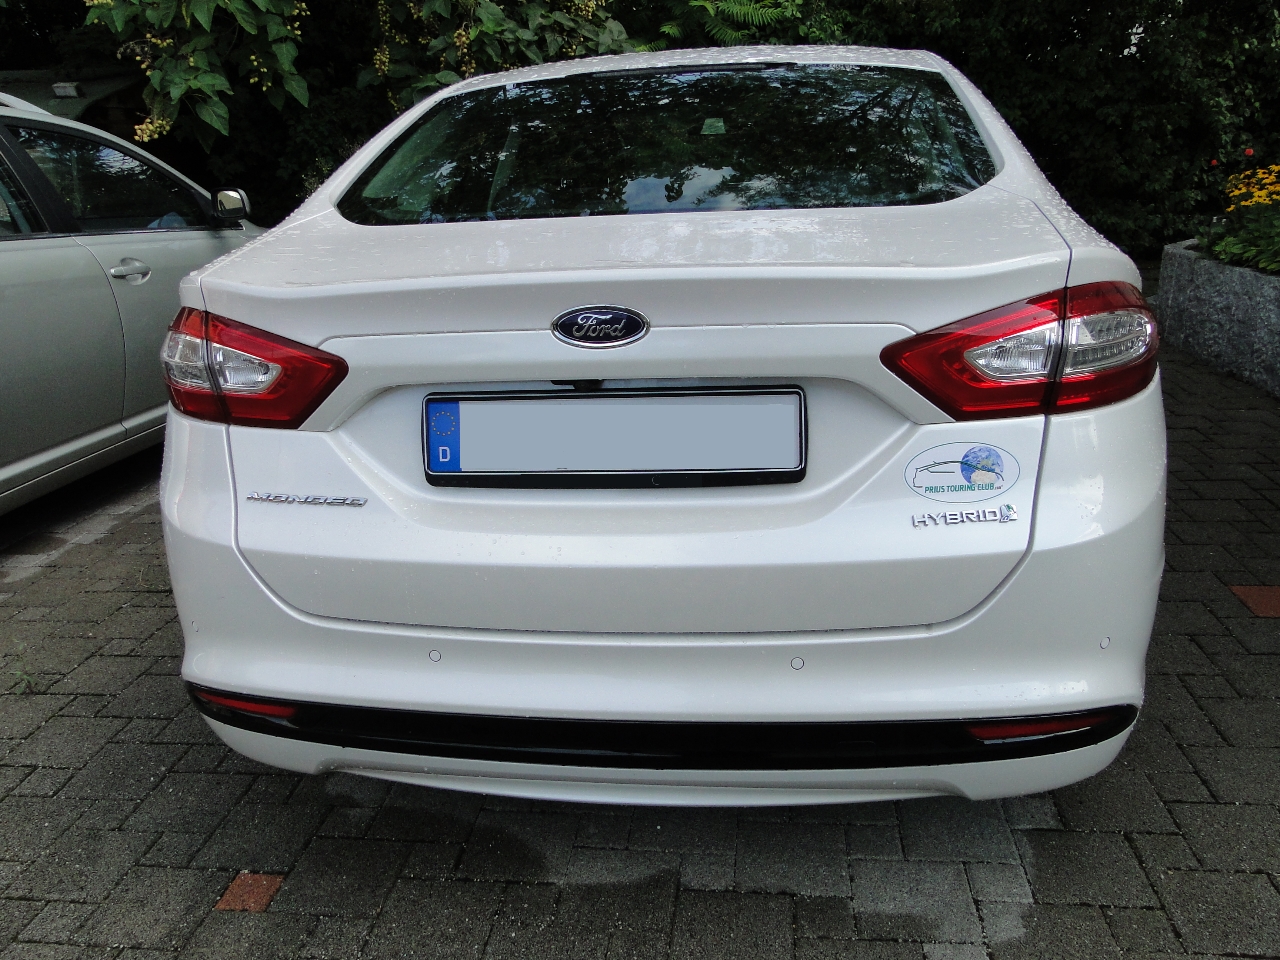 Mondeo Hybrid in Germany